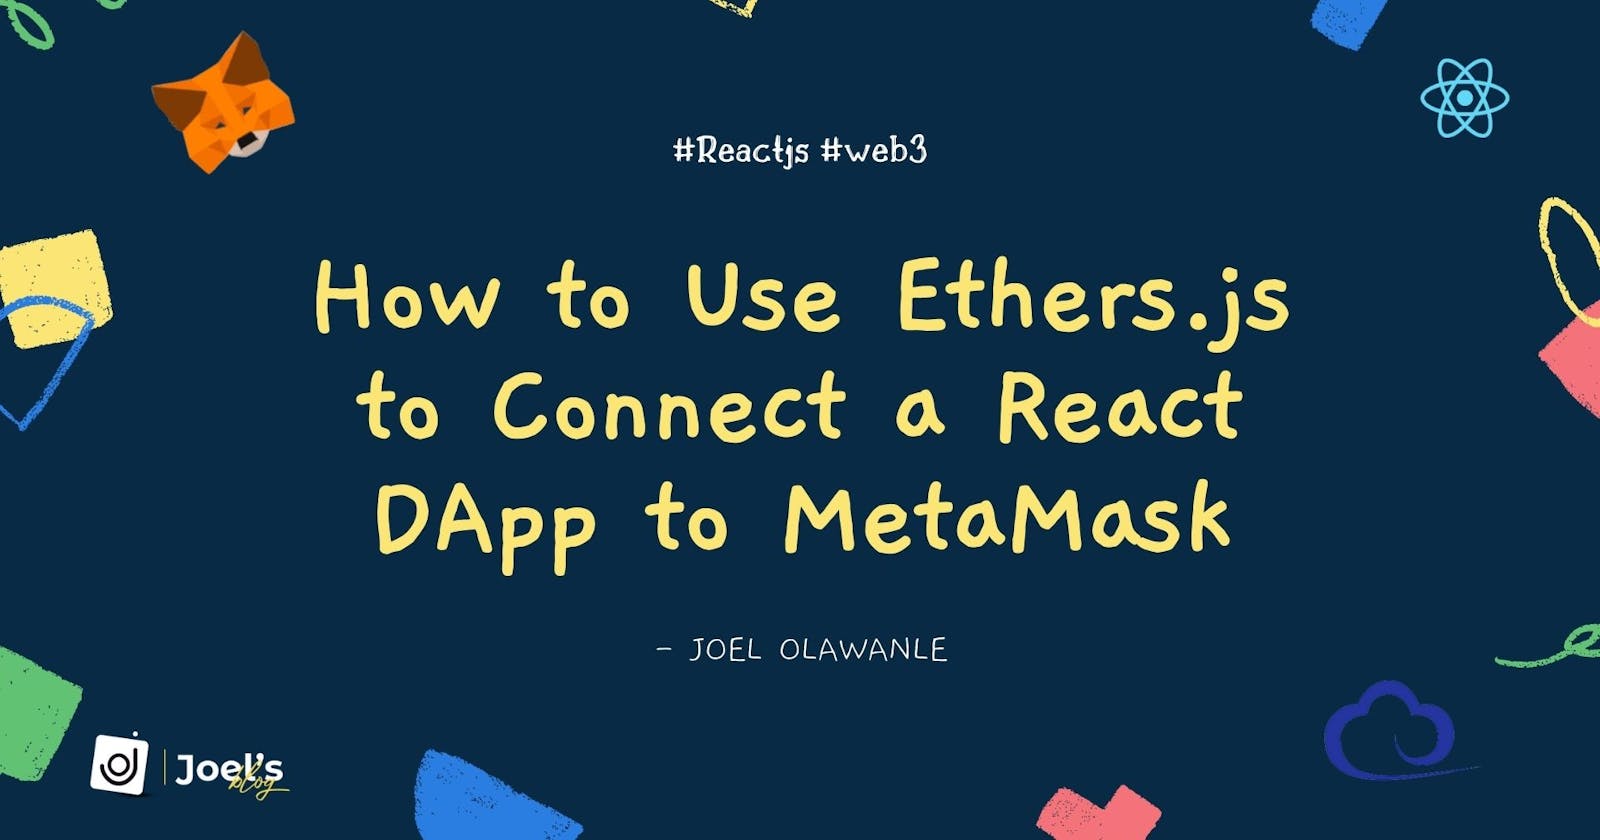 How to Connect a React DApp to MetaMask